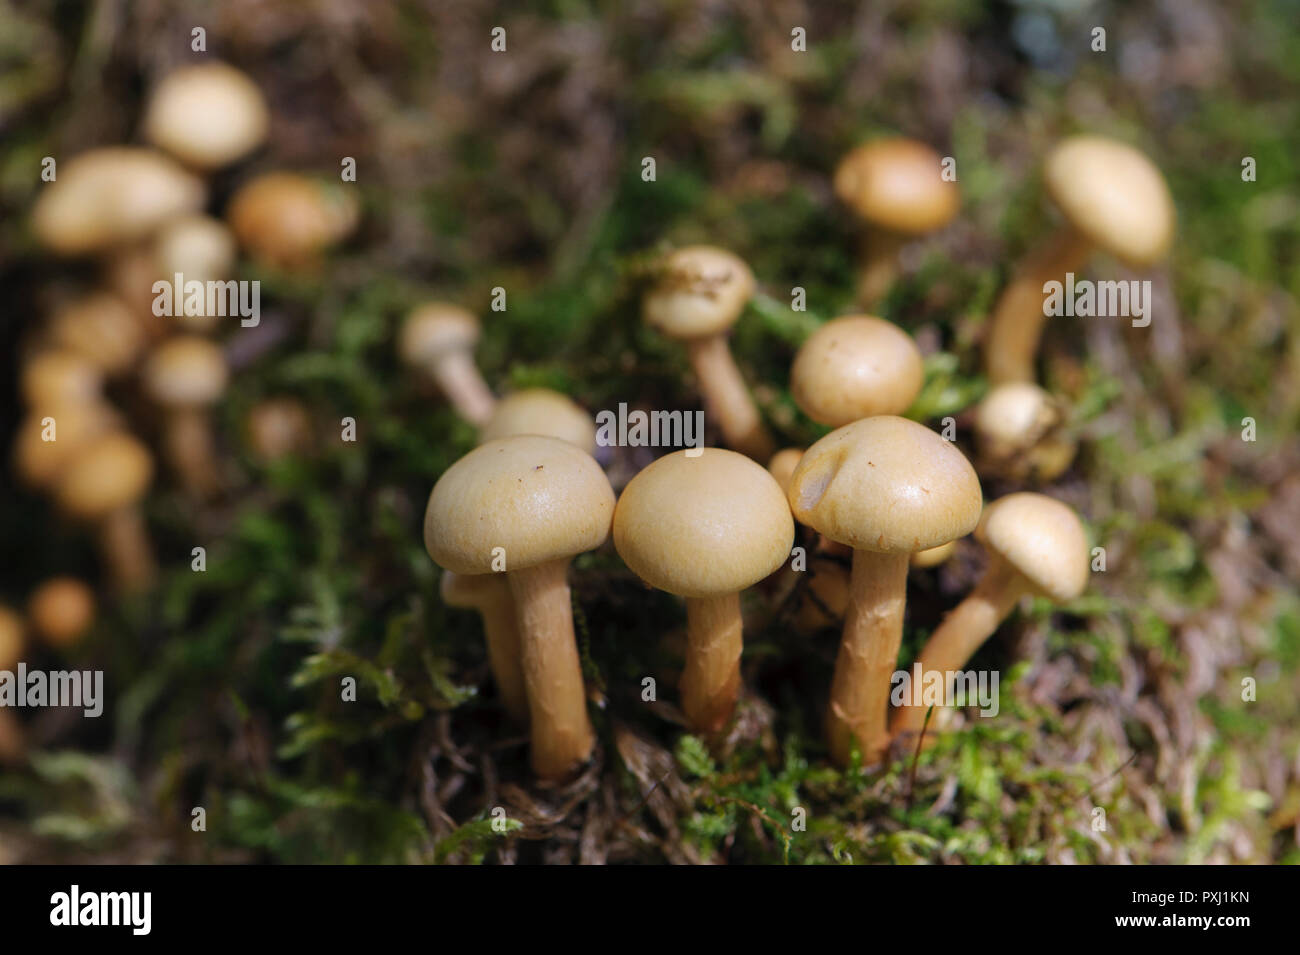 Cluster of sulphur tuft mushrooms growing in the Adirondack forest, New York state, USA. Stock Photo